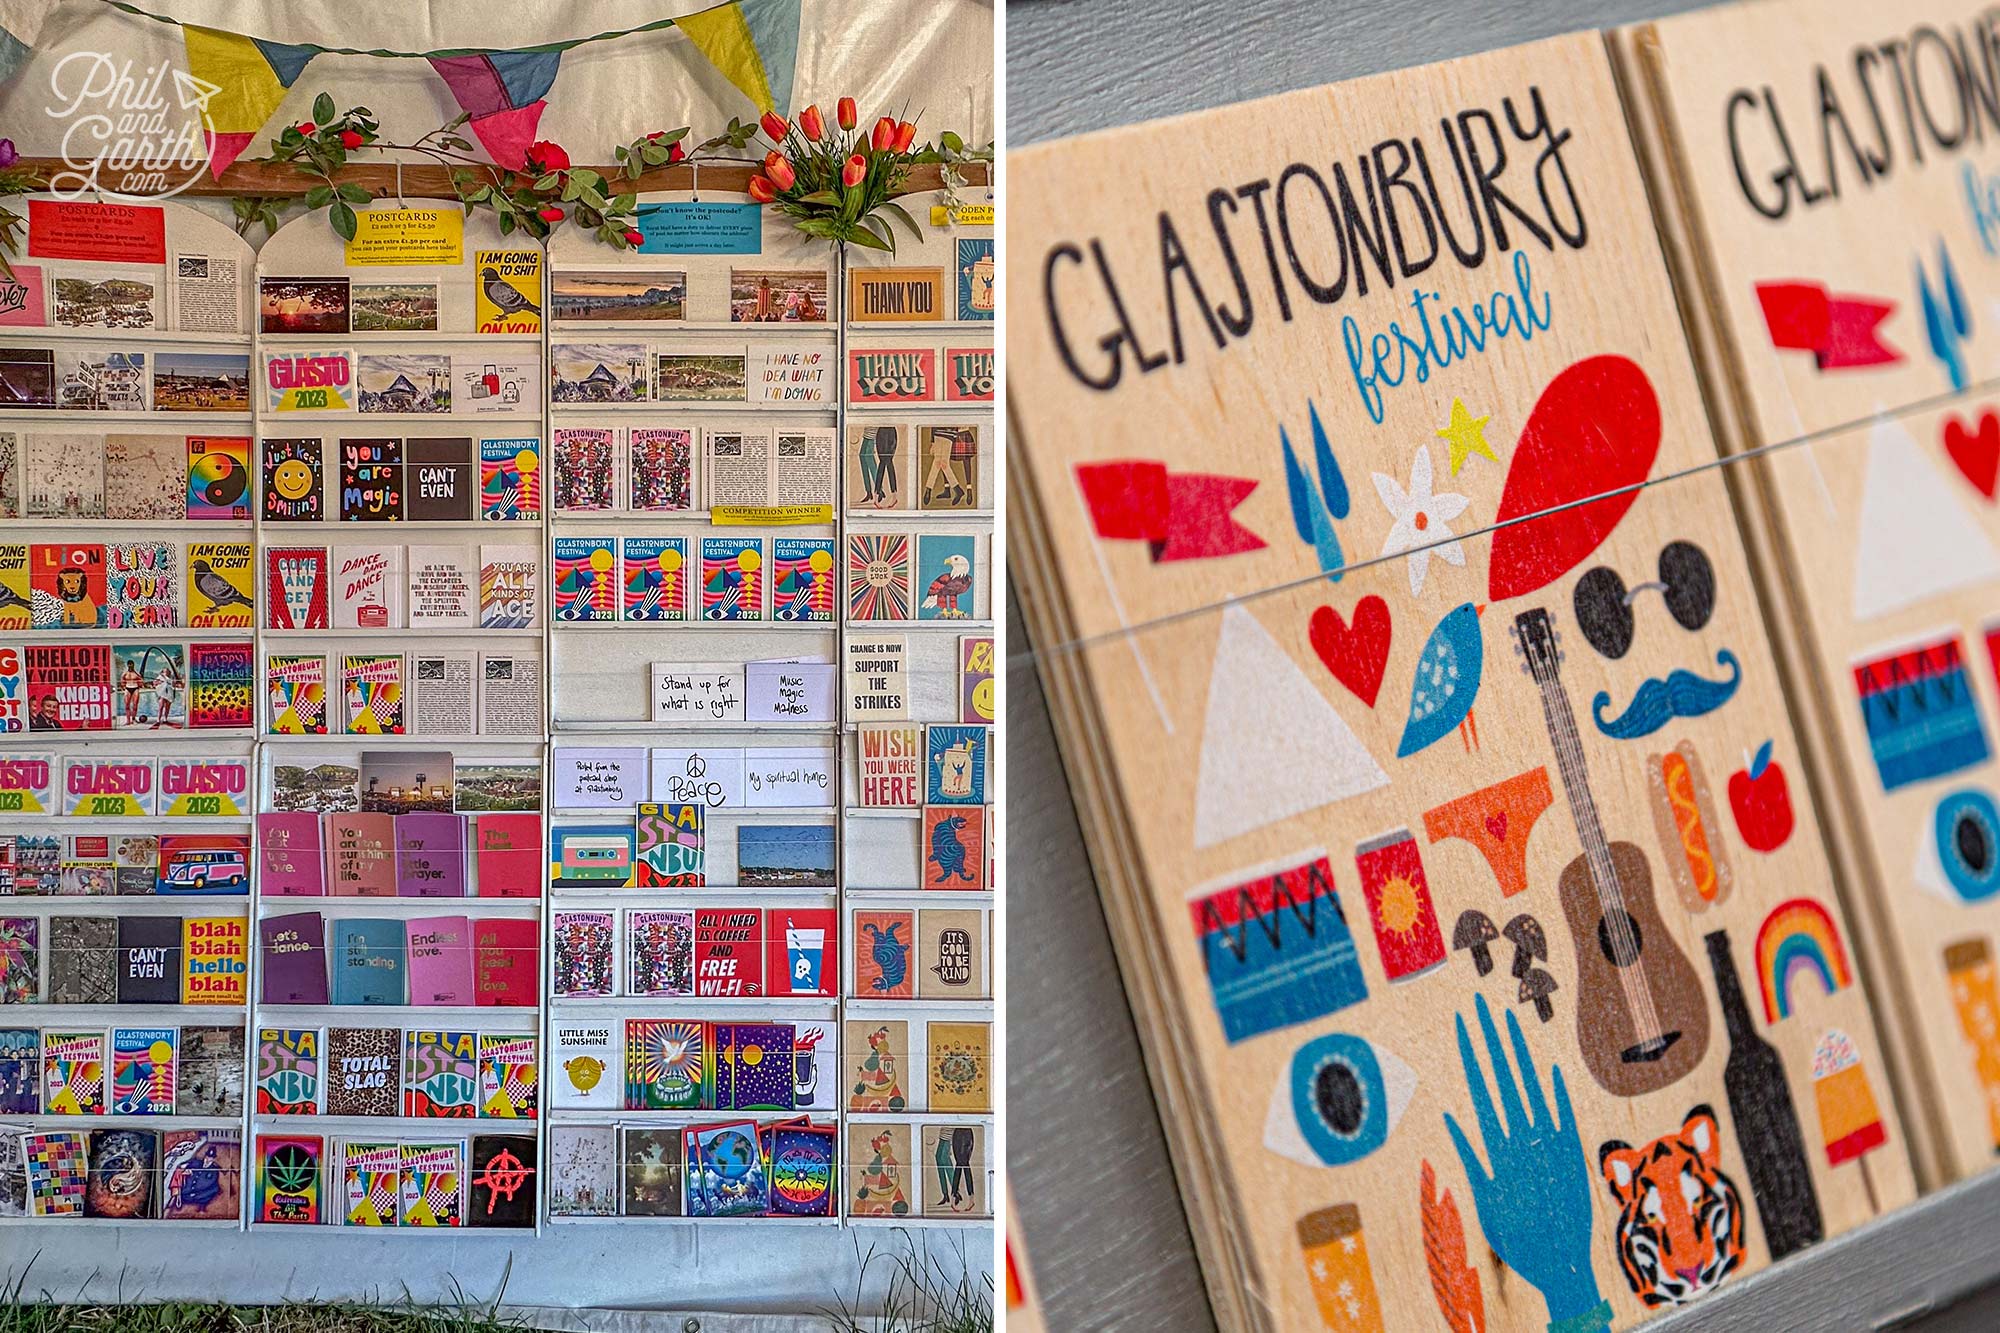 Glastonbury festival postcards - the wooden ones are lovely